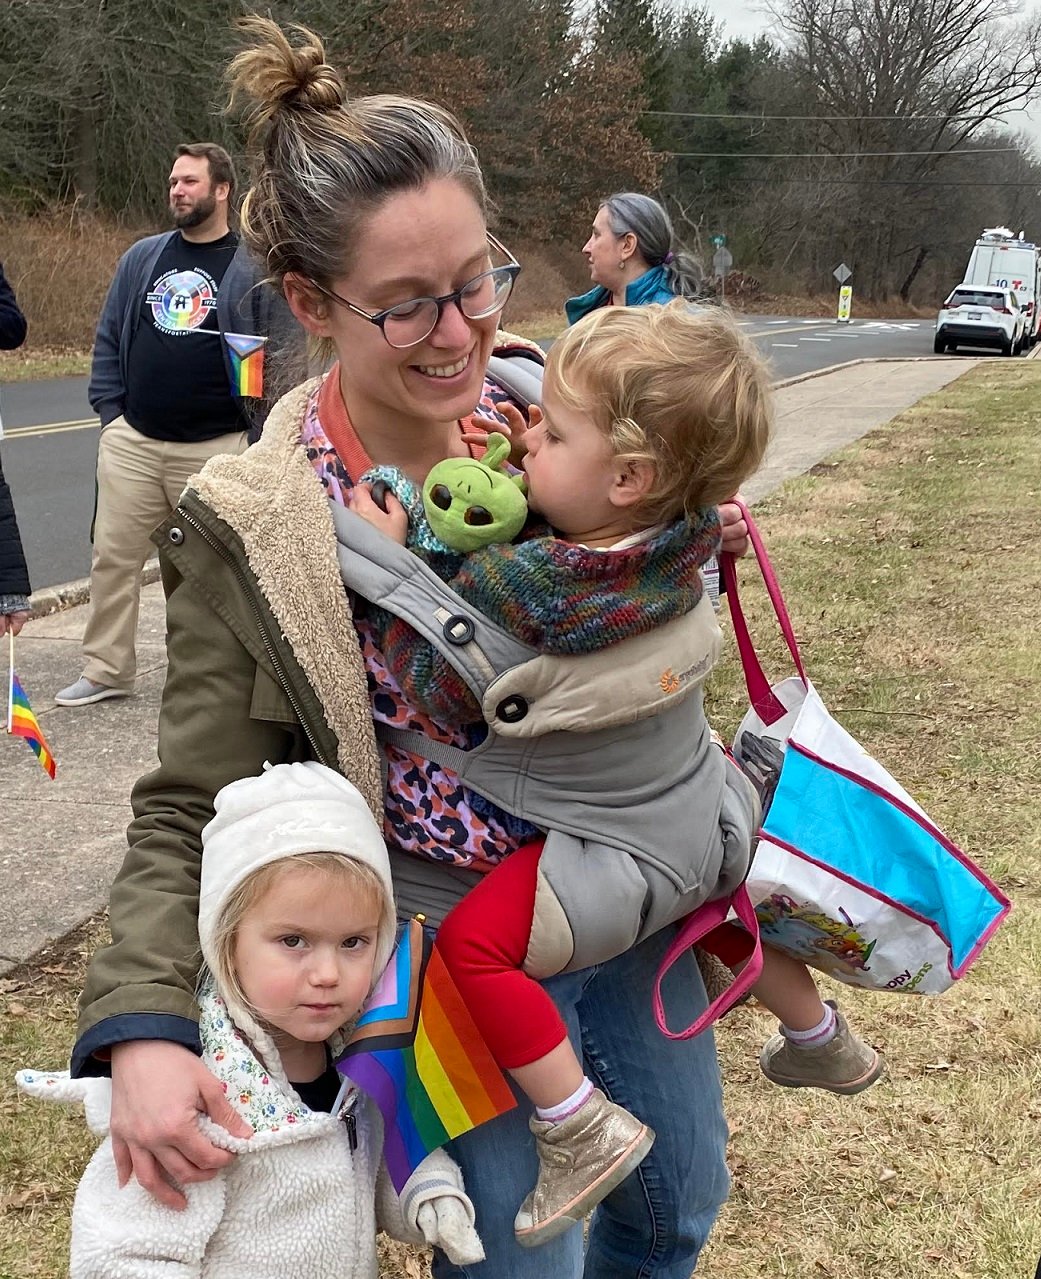 Dana Roberts, a Doylestown Borough mother, brought her young children to the rally to “support teachers.”